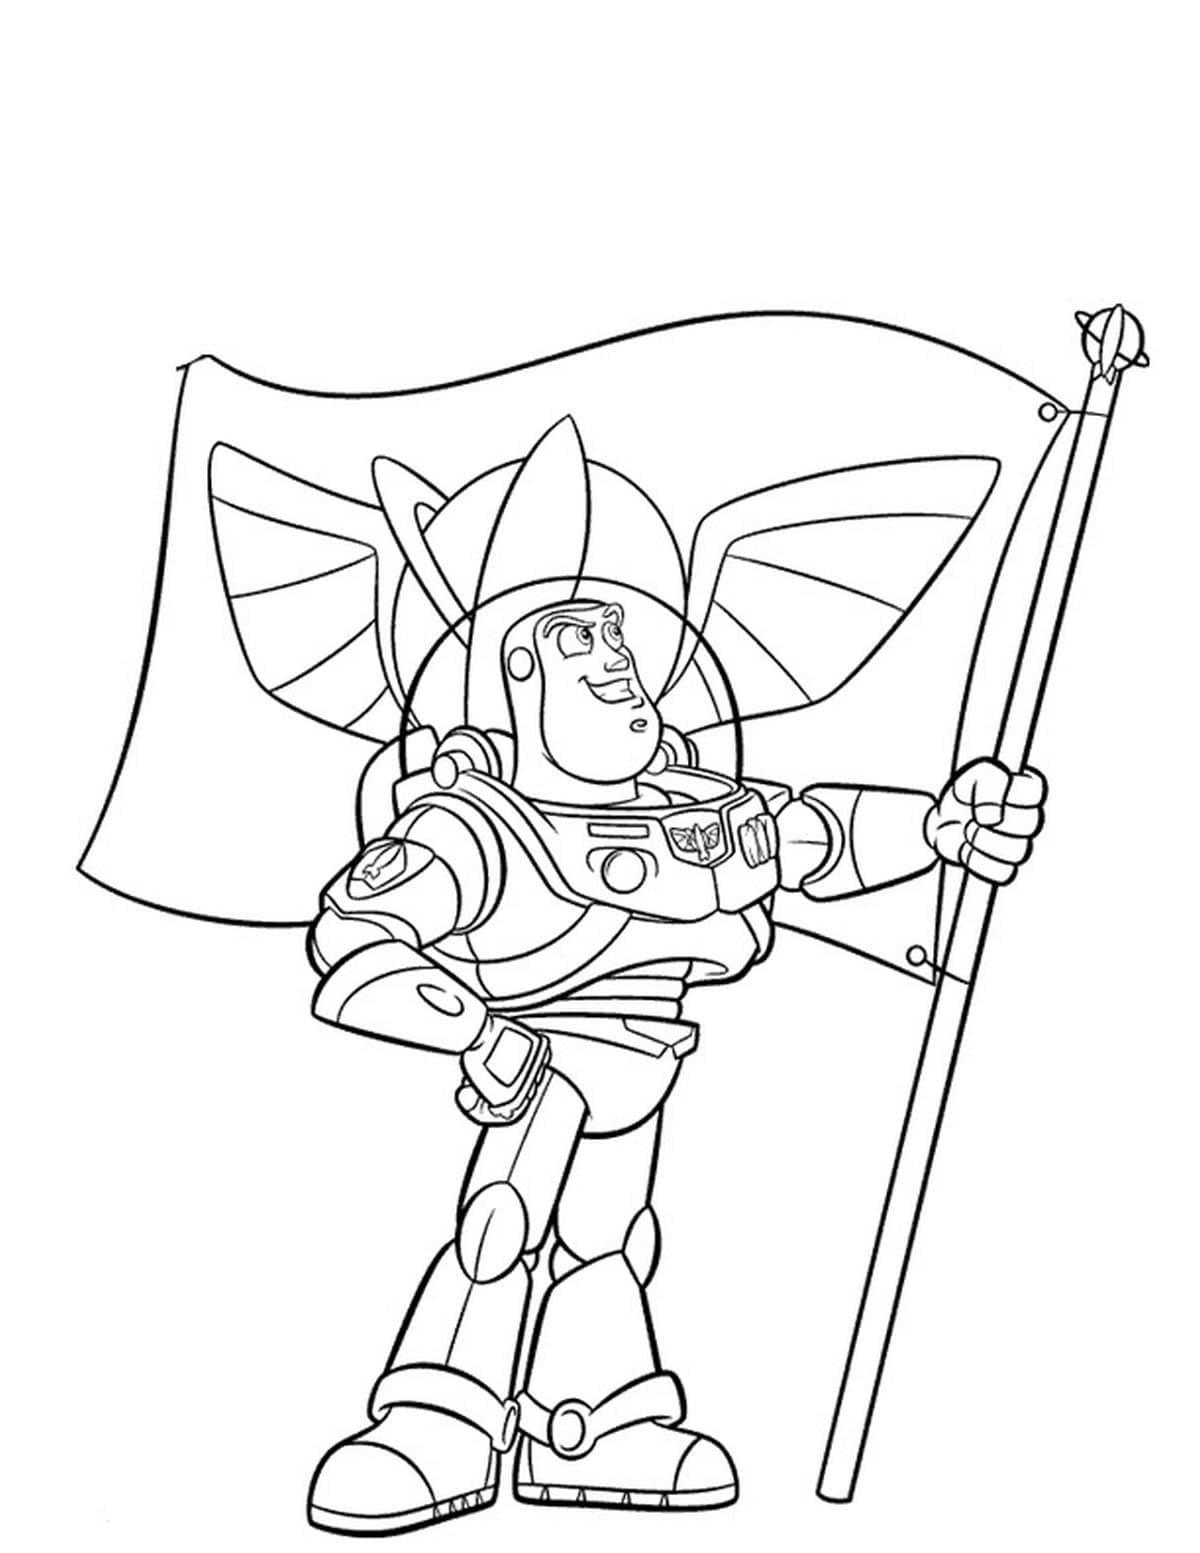 Buzz Lightyear Coloring Pages | 110 Pictures Free Printable